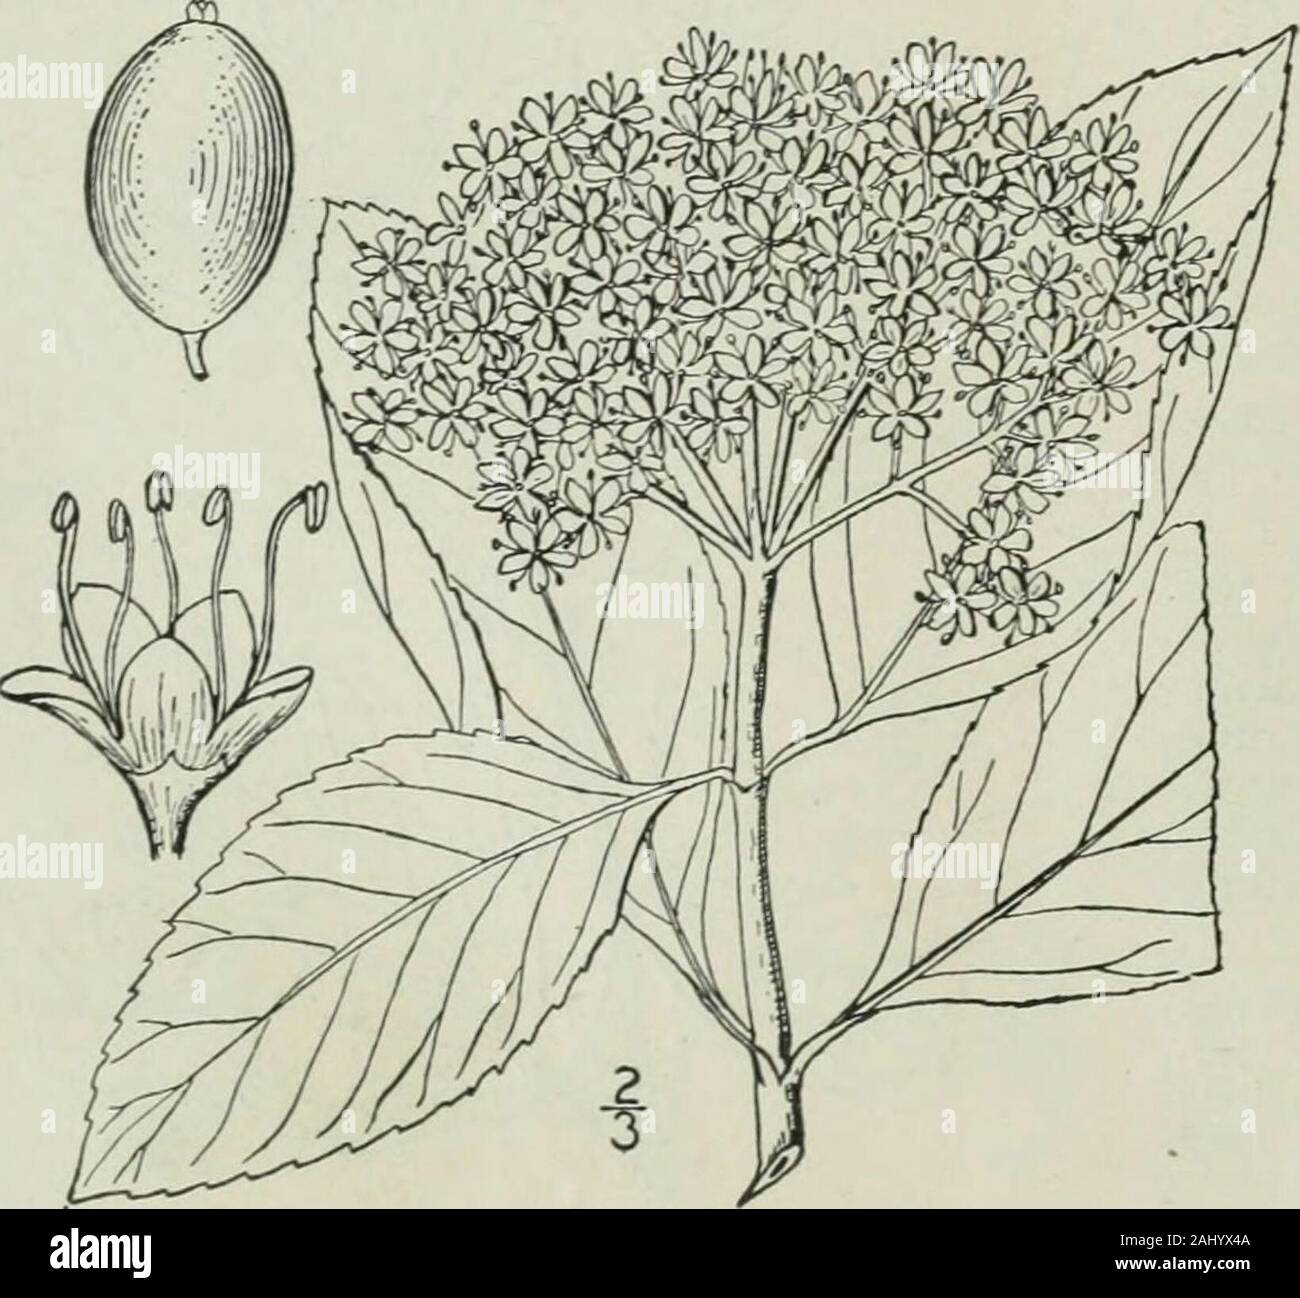 An illustrated flora of the northern United States, Canada and the British possessions : from Newfoundland to the parallel of the southern boundary of Virginia and from the Atlantic Ocean westward to the 102nd meridian . 10. Viburnum cassinoides L. Withe-rod. Appalachian Tea.Fig. 3966. Jiburnum cassinoides L. Sp. PI. Ed. 2, 384. 1762.Viburnum nudum var. cassinoides T. & G. Fl. N. A. 2: 14. 1841. A shrub, 2°-i2° high, with ascend-ing gray branches, the twigs some-what scurfy, or glabrous. Leavesovate or oval, thick, pinnately veined,narrowed or sometimes rounded atthe base, acute or blunt-acumi Stock Photo